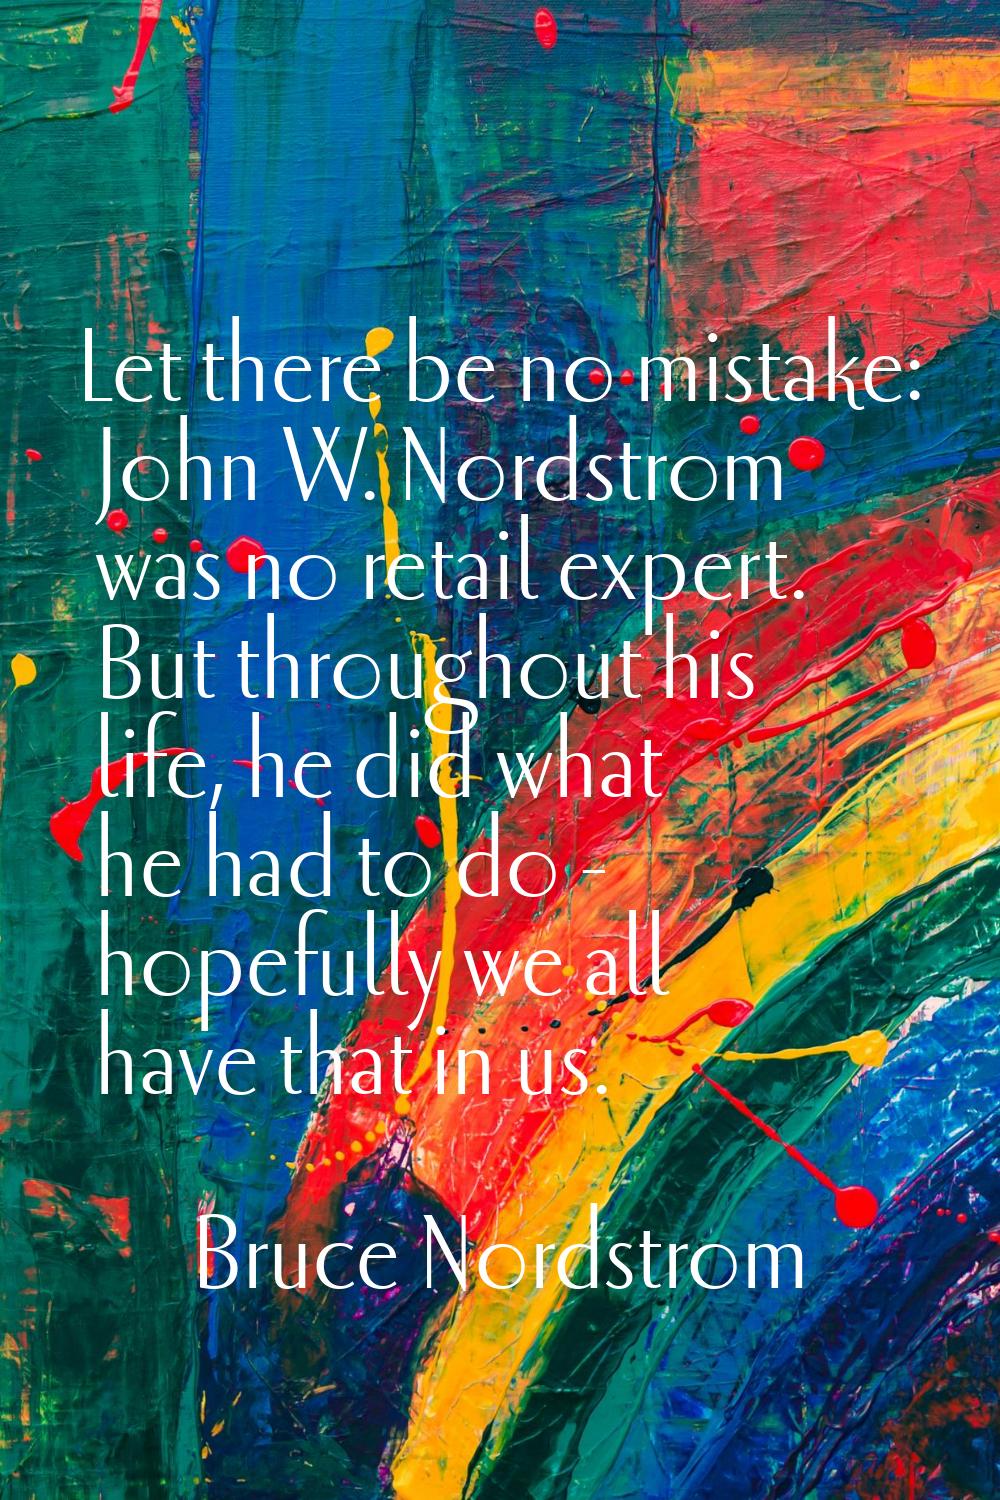 Let there be no mistake: John W. Nordstrom was no retail expert. But throughout his life, he did wh